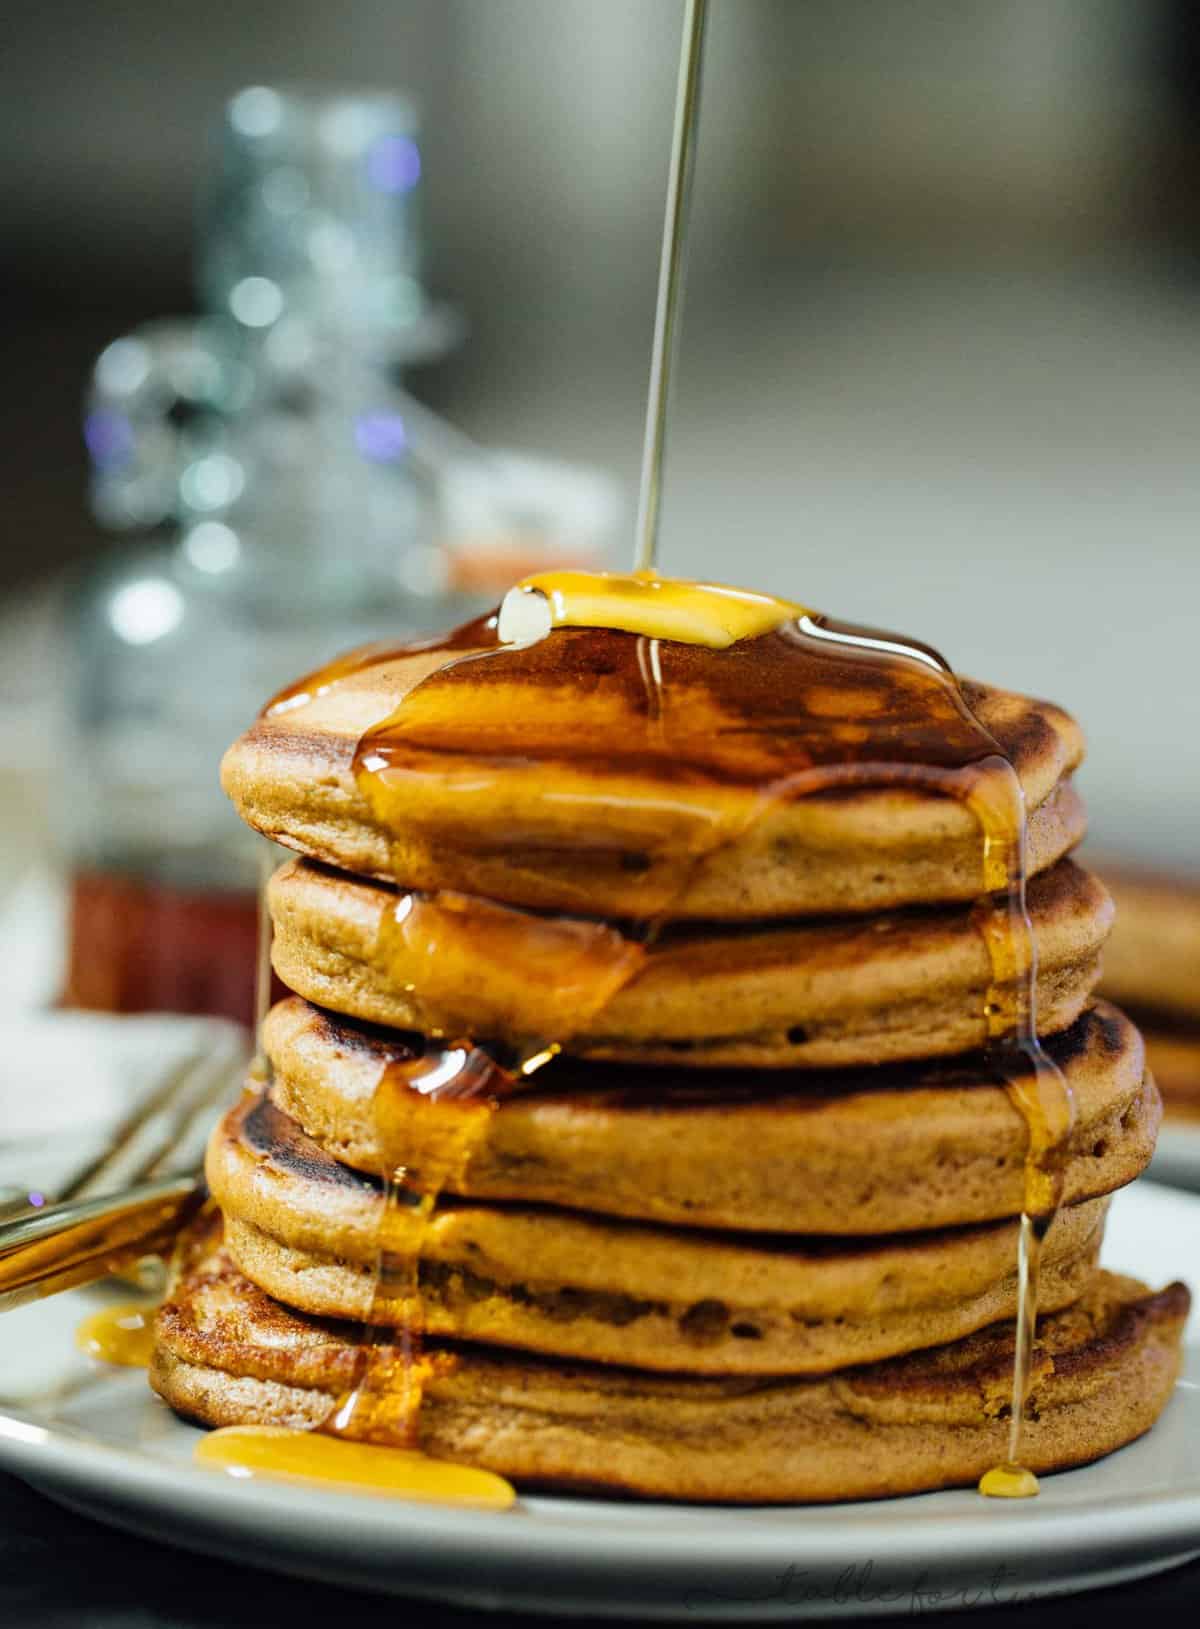 Fluffy and full of gingerbread flavor, these gingerbread pancakes are the perfect breakfast or brunch item to have on hand!